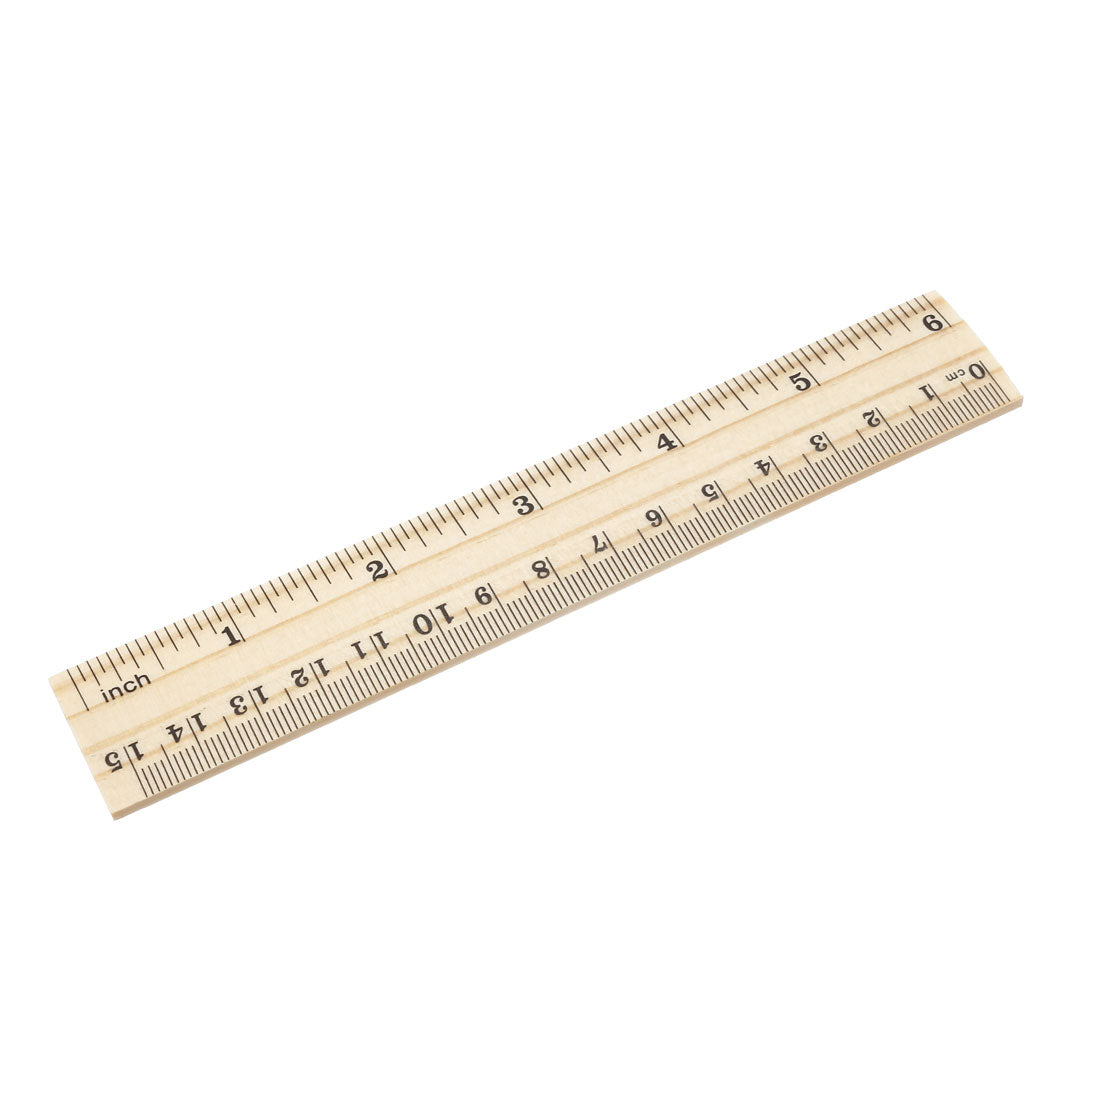 uxcell Uxcell Wood Ruler 15cm 6 Inch 2 Scale Office Rulers Wooden Straight Rulers Measuring Ruler 10pcs